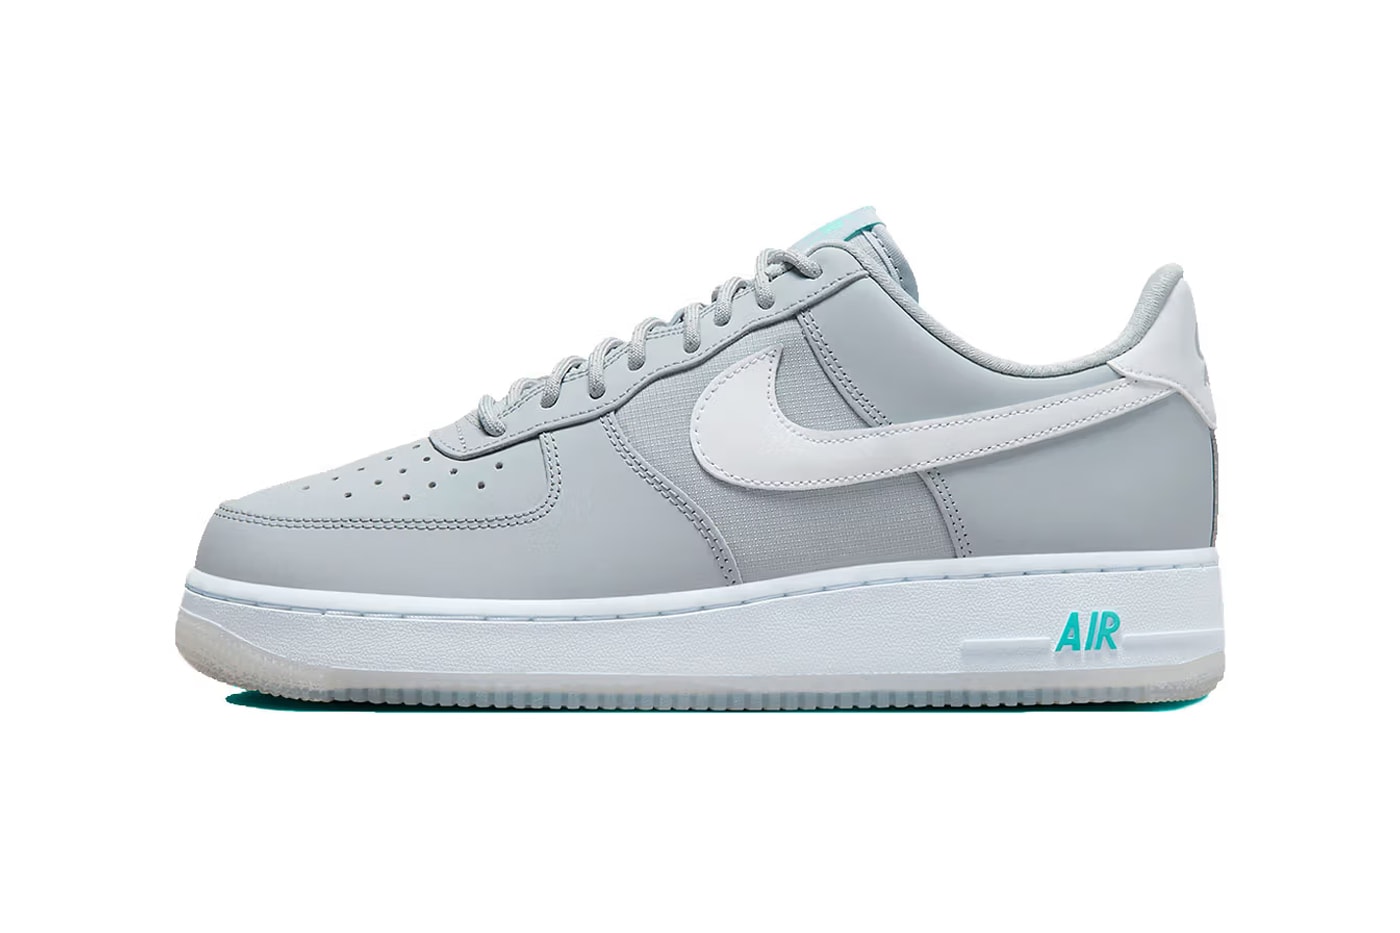 Nike Back to the Future Mag Air Force 1 Release Info